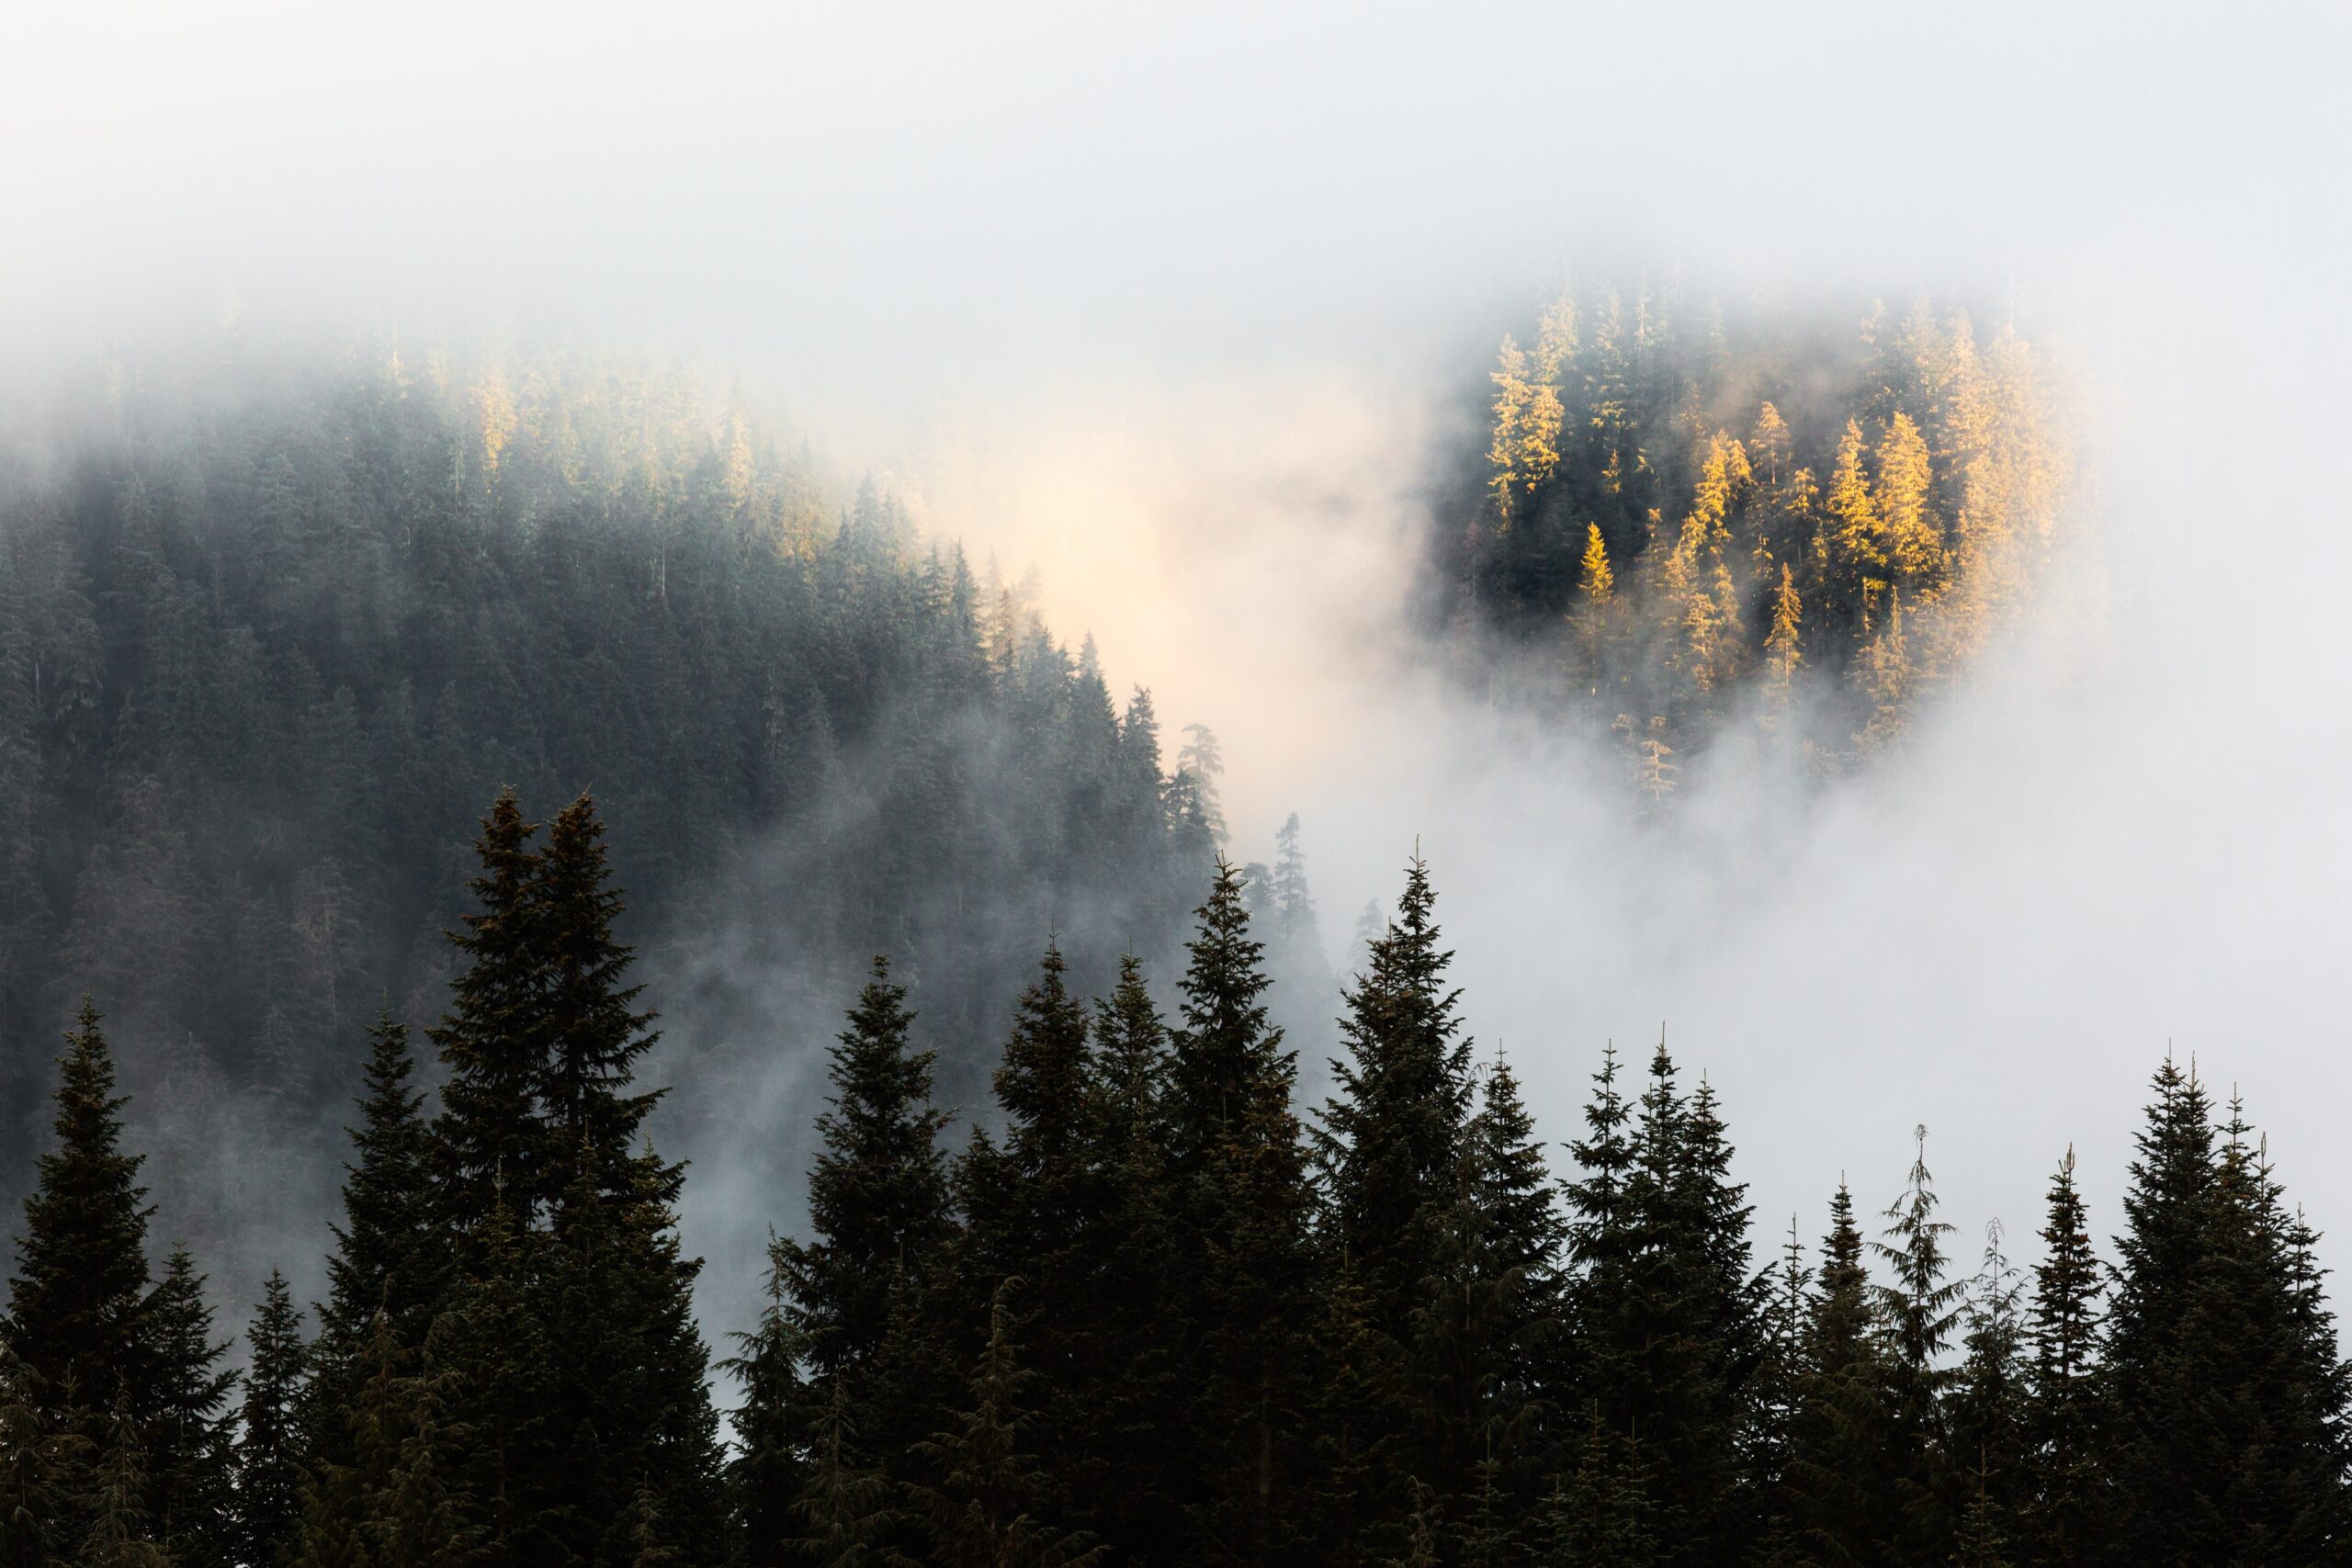 A photograph of foggy mountains with pine trees.